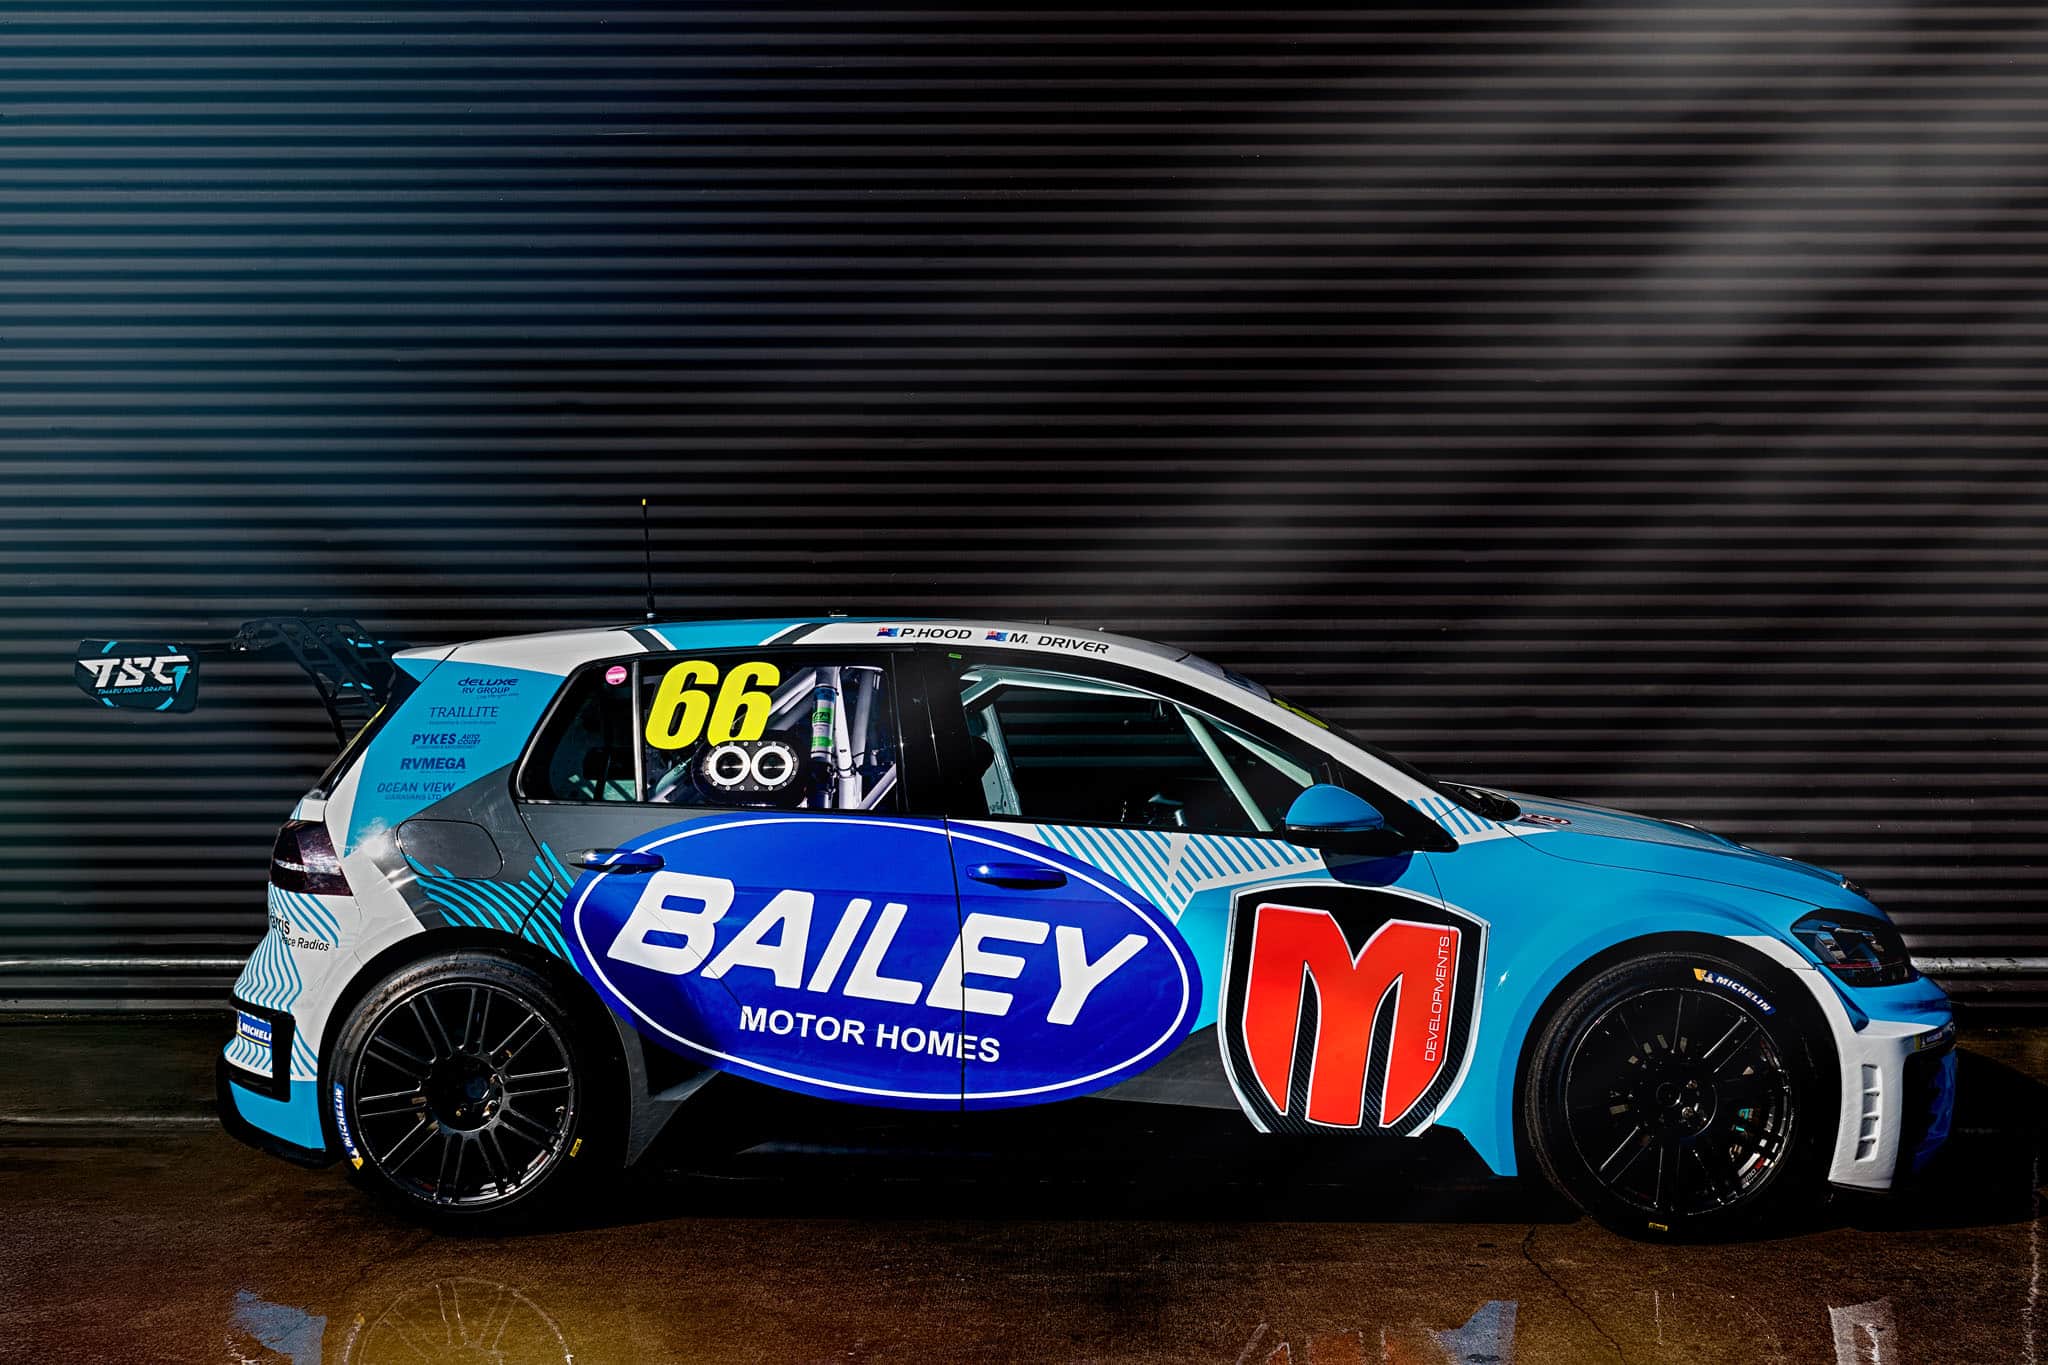 Car Photography in Queenstown, New Zealand of Golf TCR race car